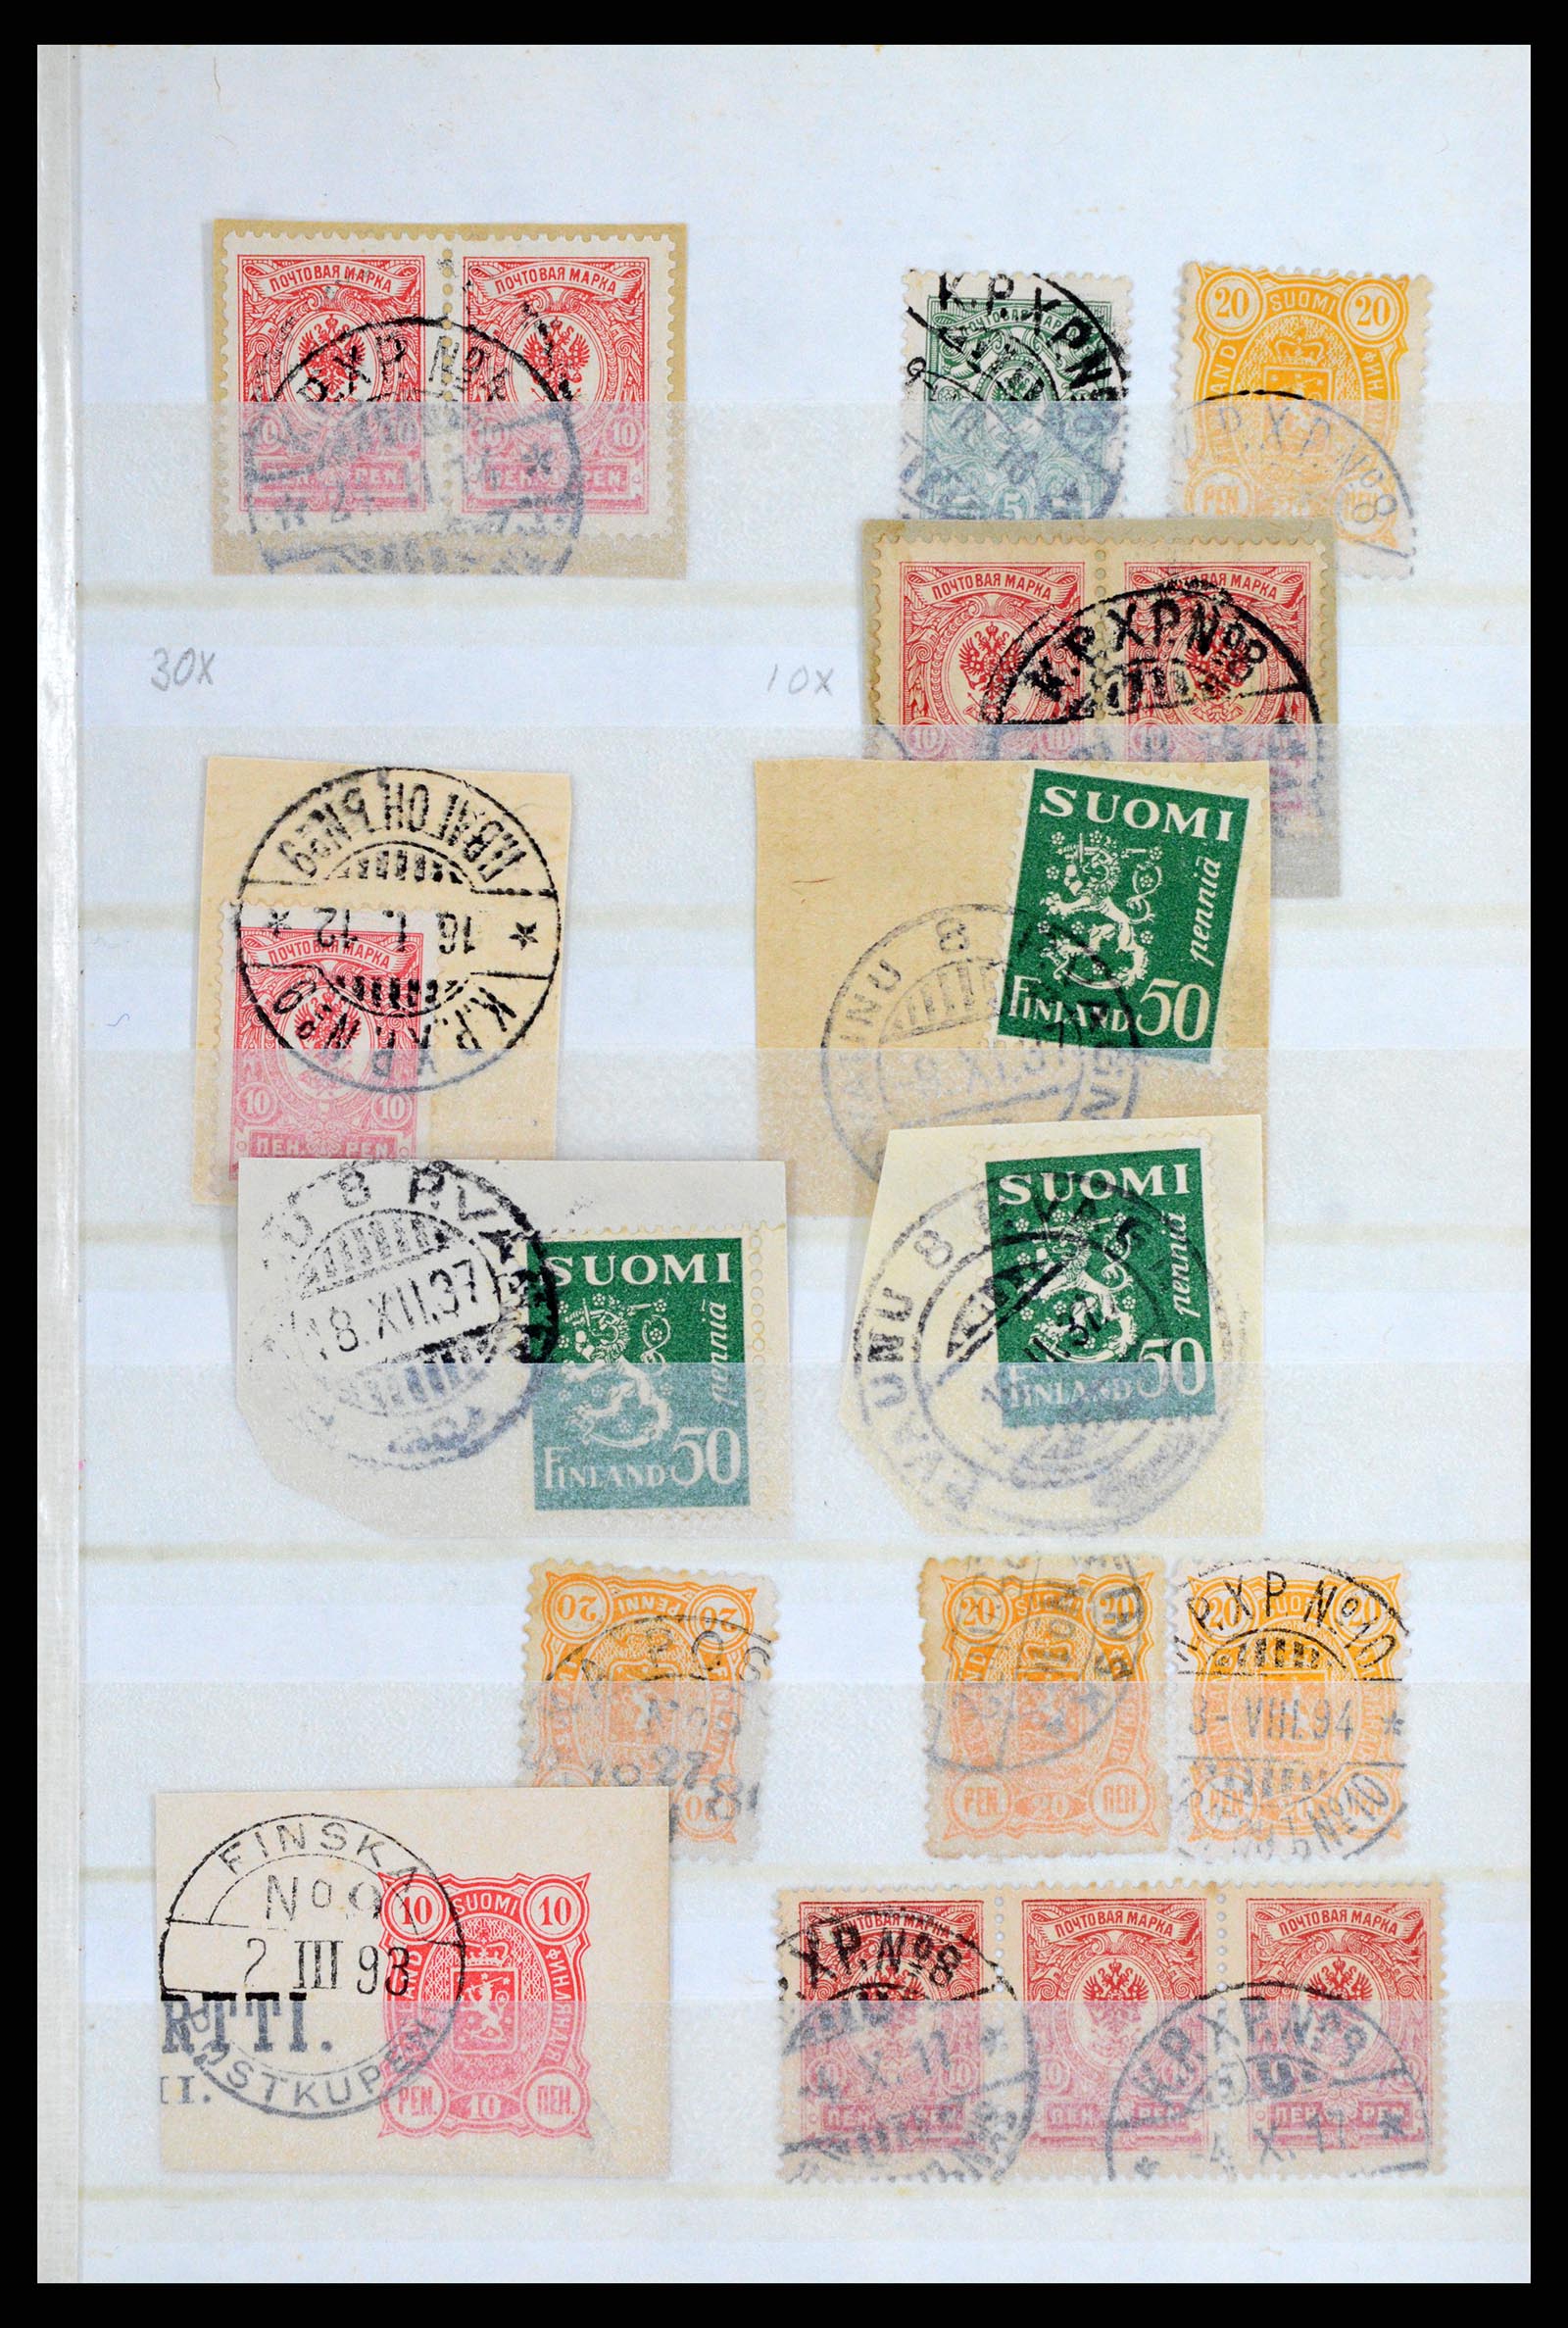 37766 178 - Stamp collection 37766 Finland railway cancellations 1870-1950.